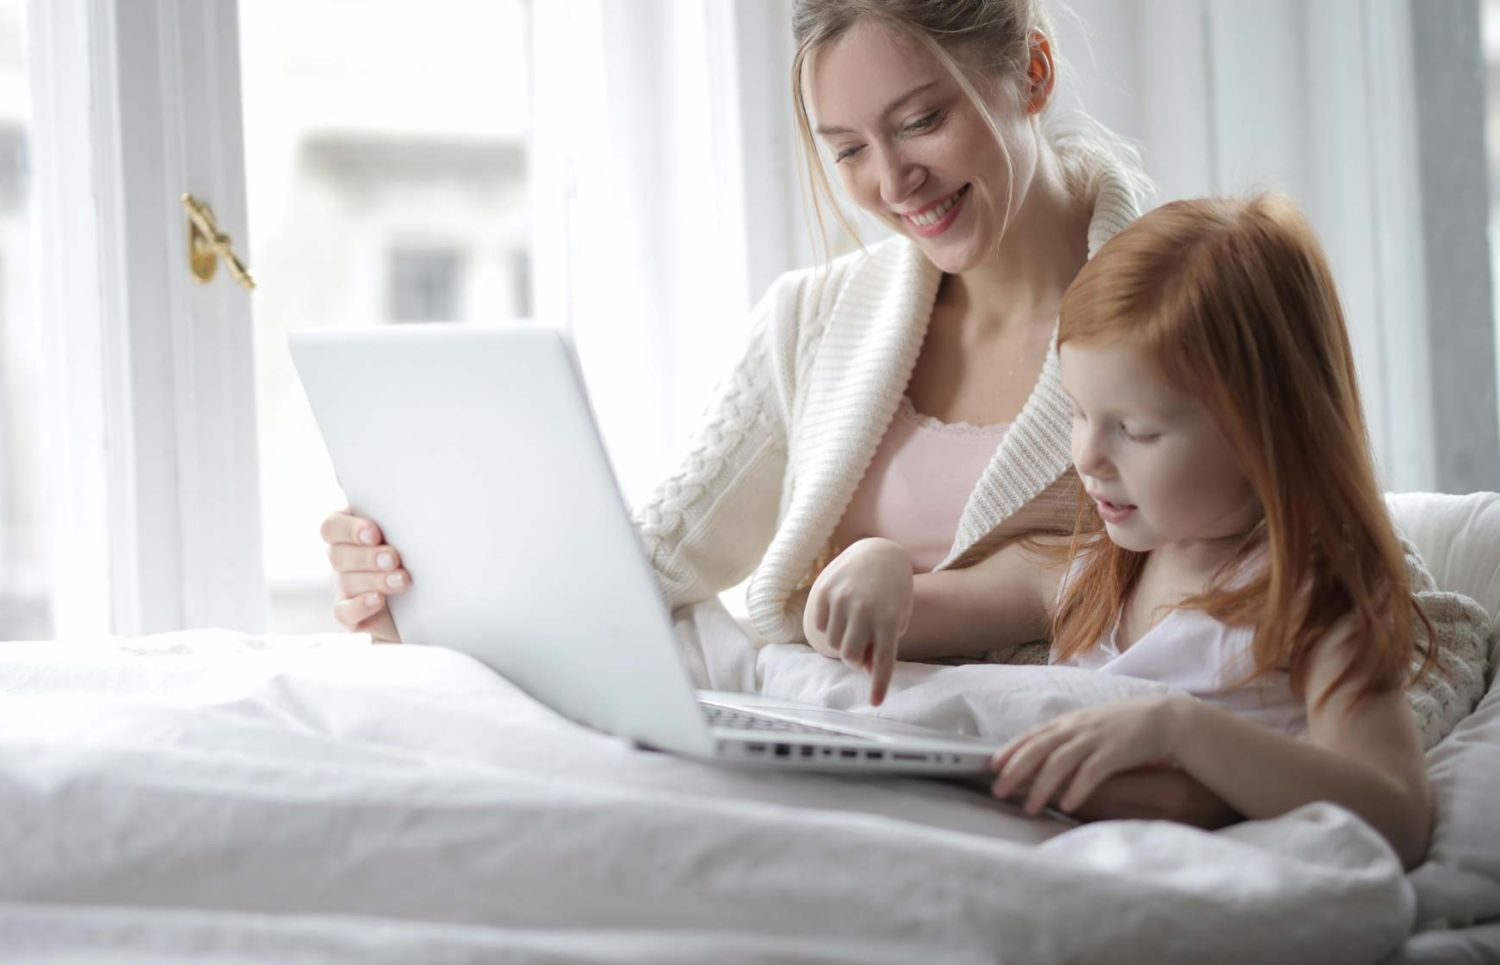 mom and daughter playing on laptop together